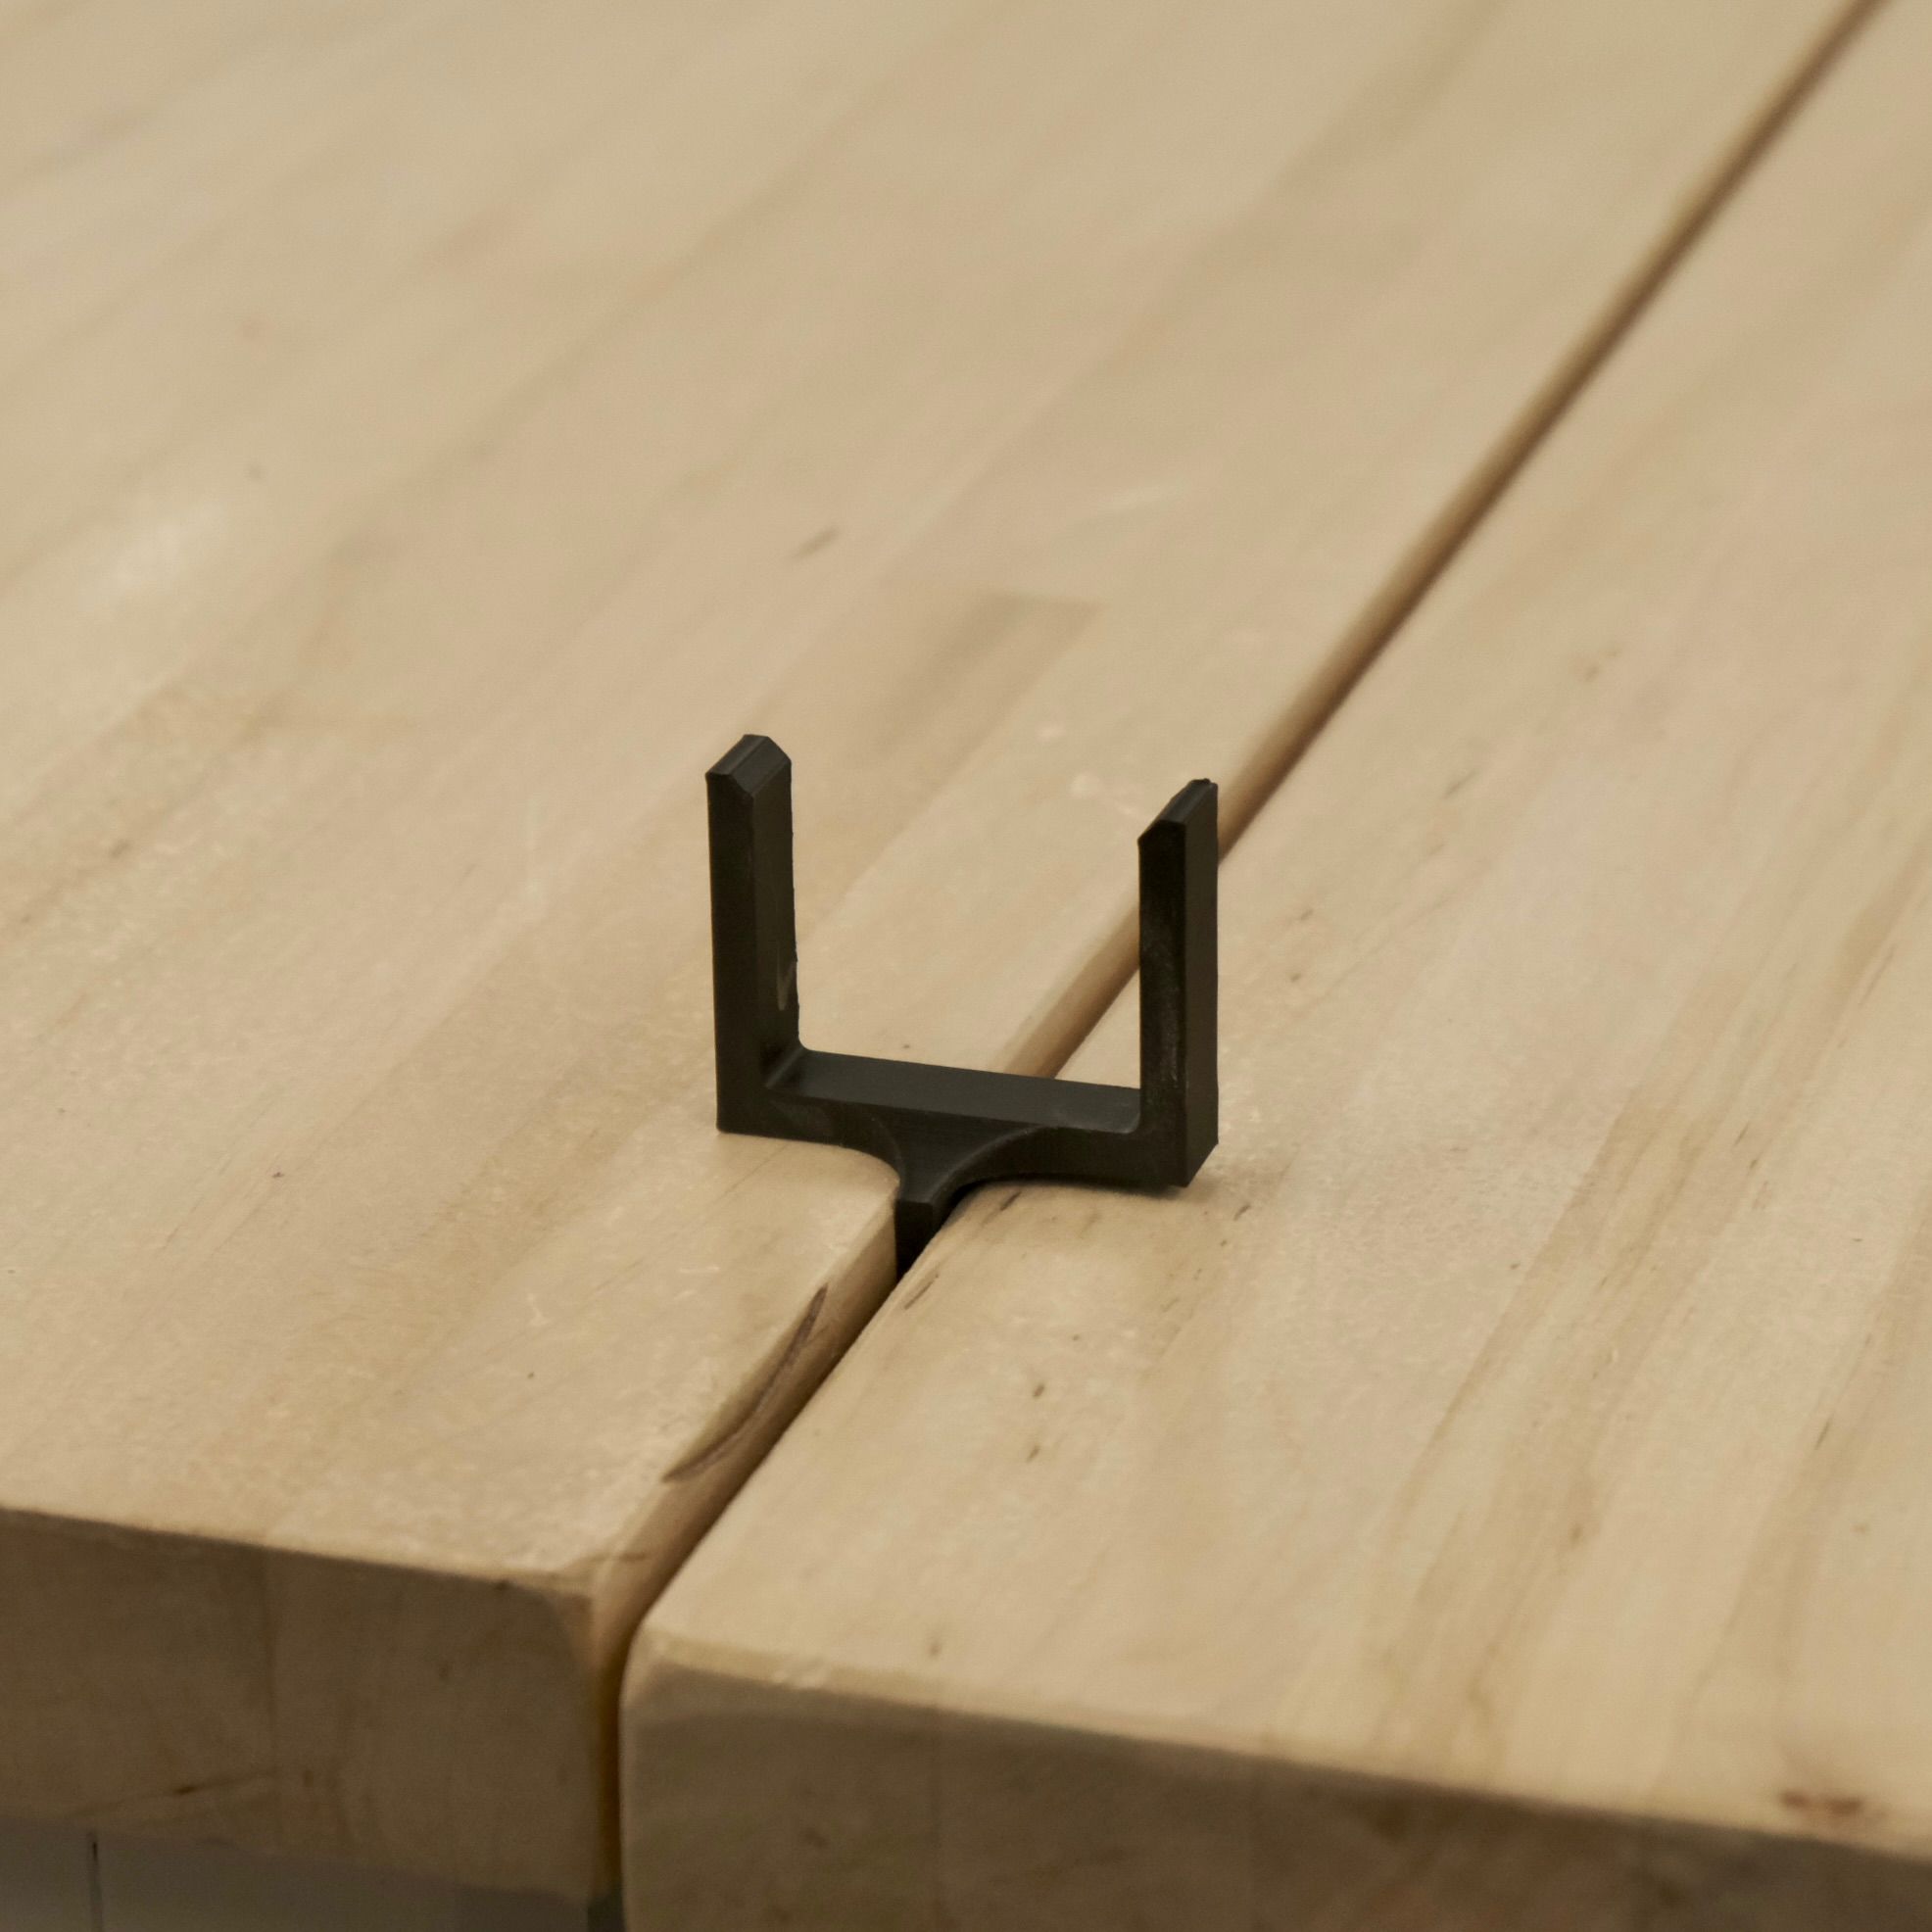 black plastic clip with the stem inserted between two wooden tables